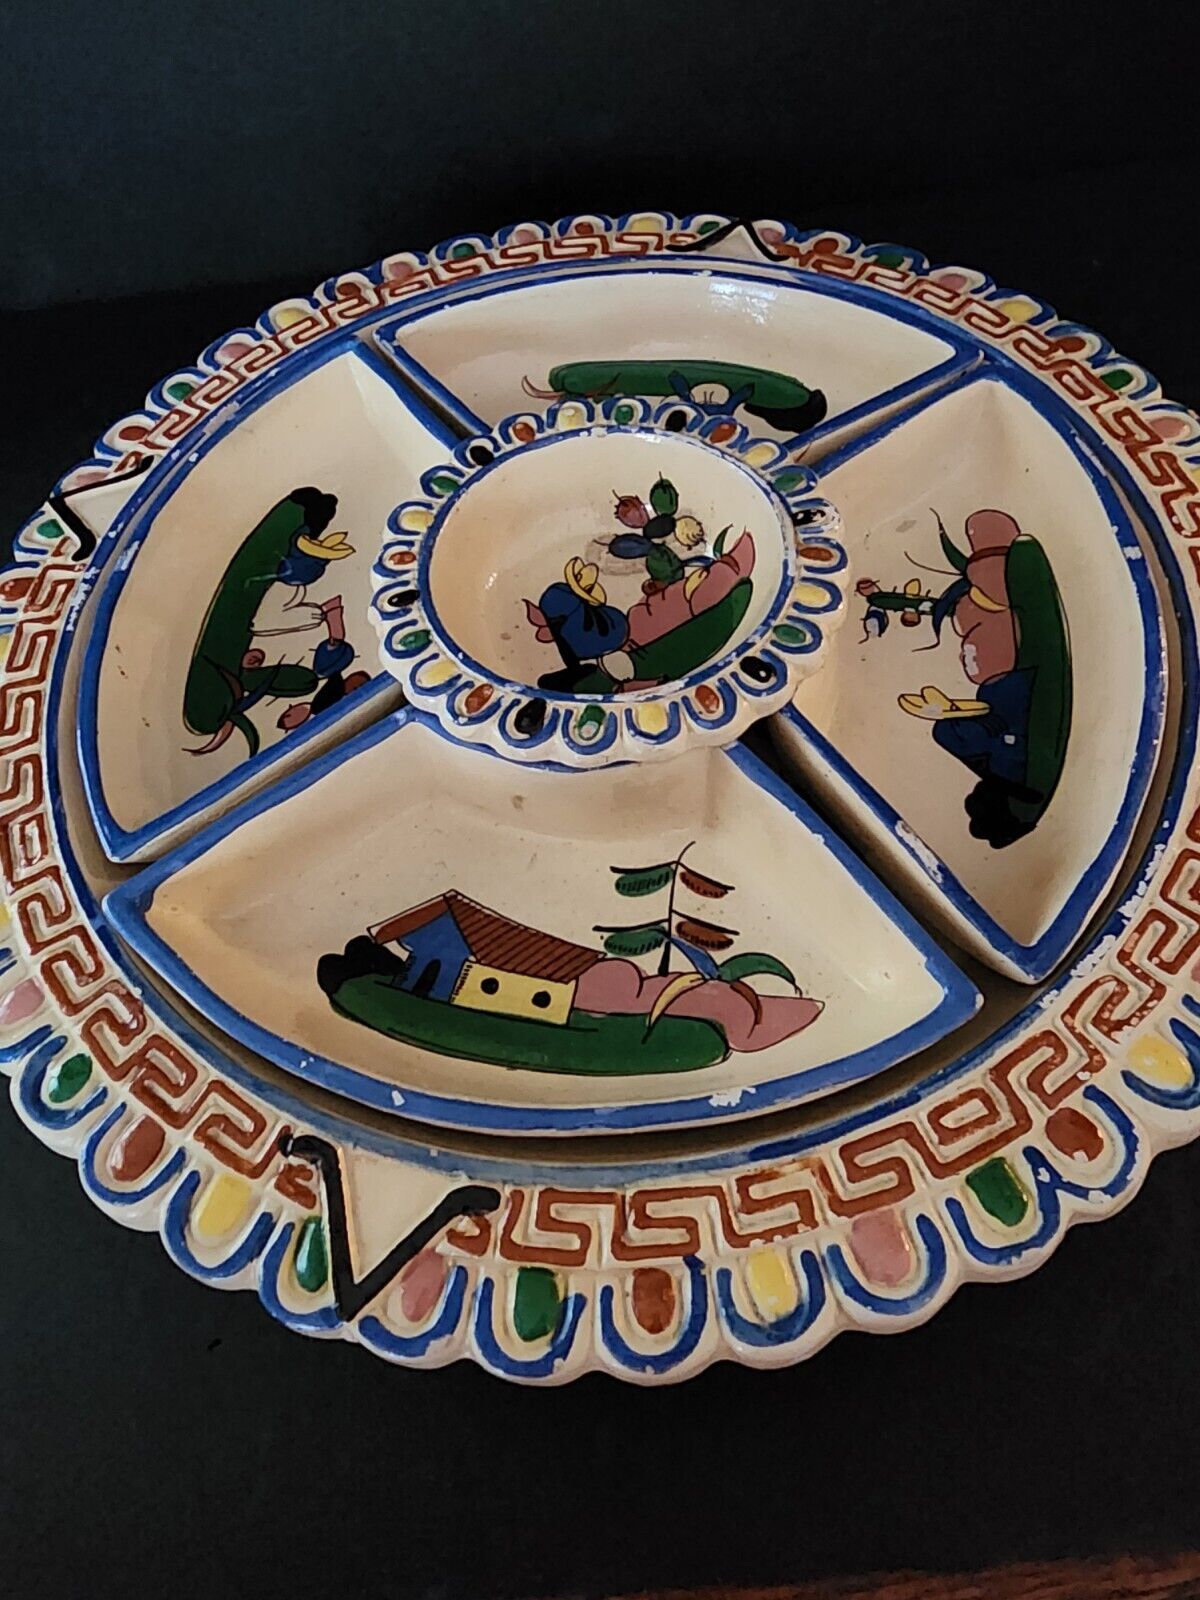 cOLorFuL Vintage Mexican Tlaquepaque Pottery Clay Salsa / Veggie Divided Tray